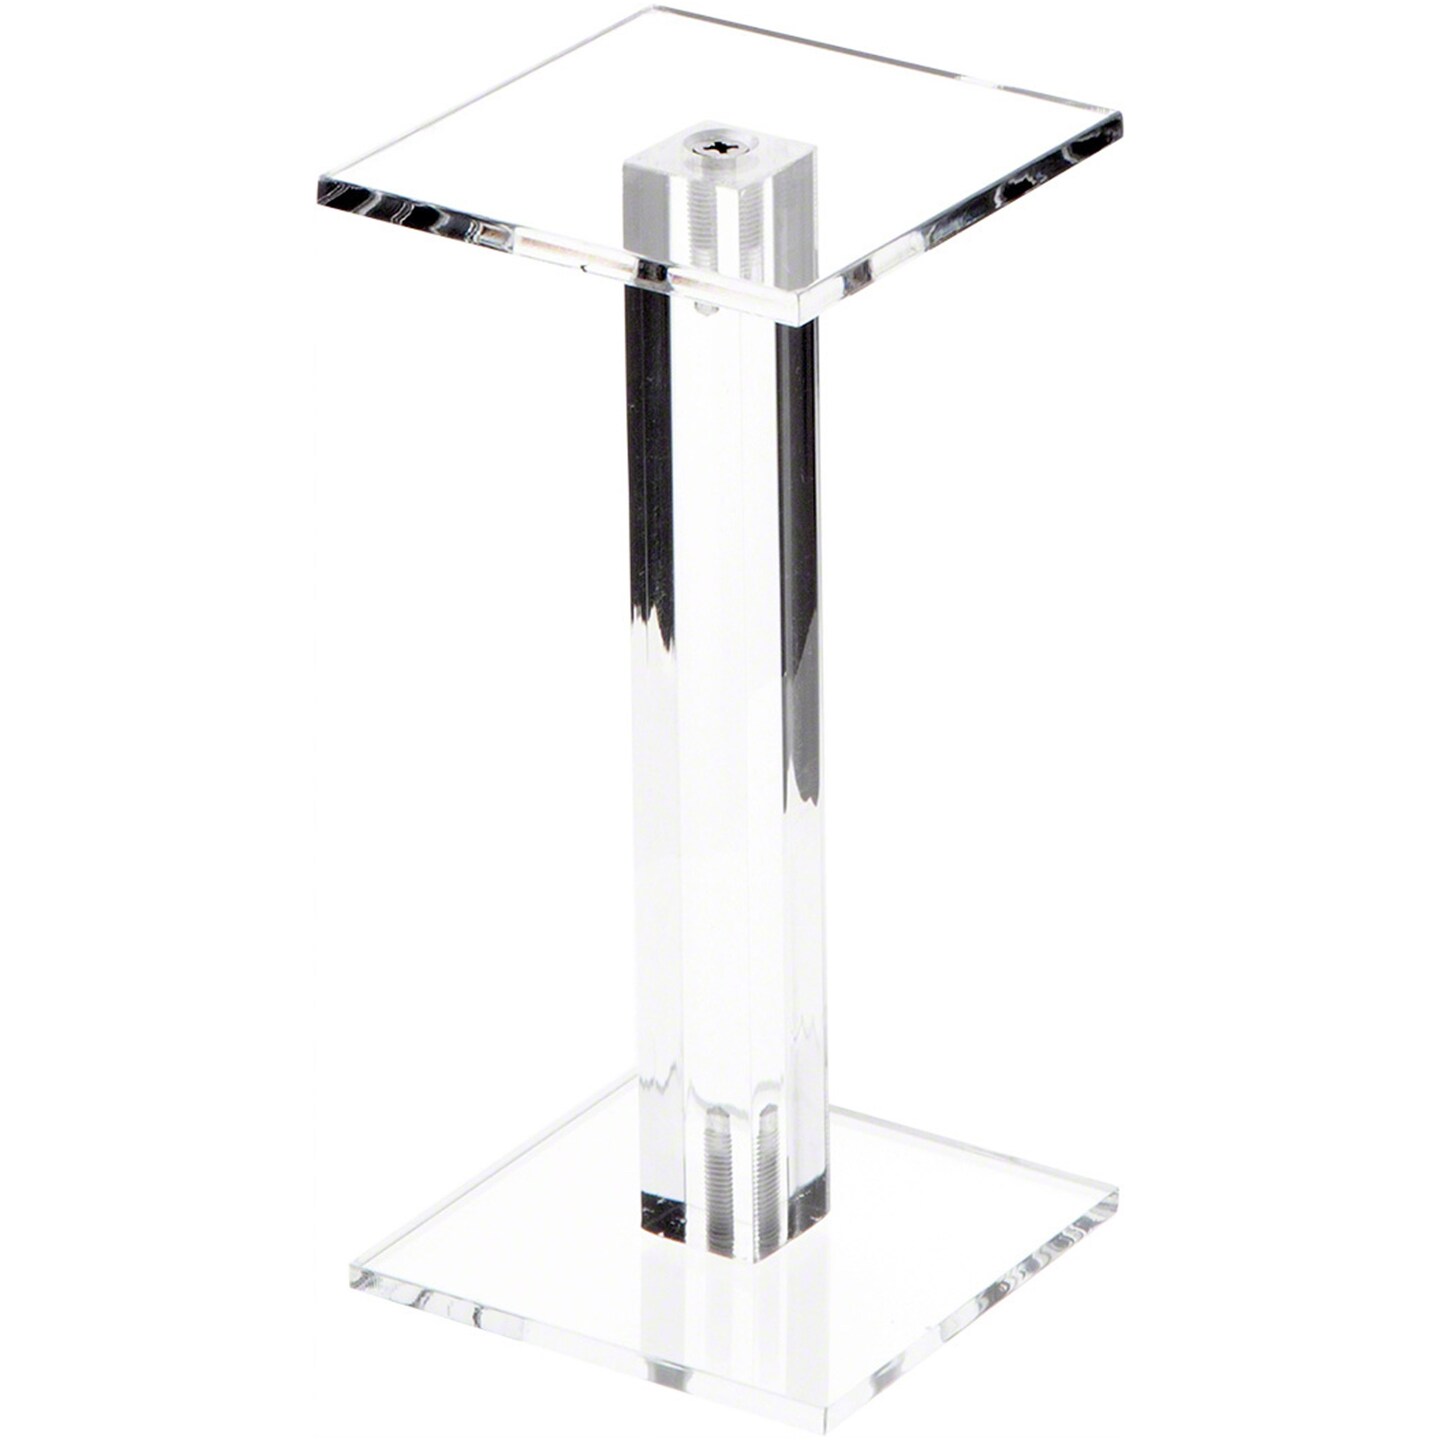 Plymor Clear Acrylic Square Barbell Pedestal Display Riser 6.375 inches (Height) x 3 inches (Width) x 3 inches (Depth) (3/16 inches thick)